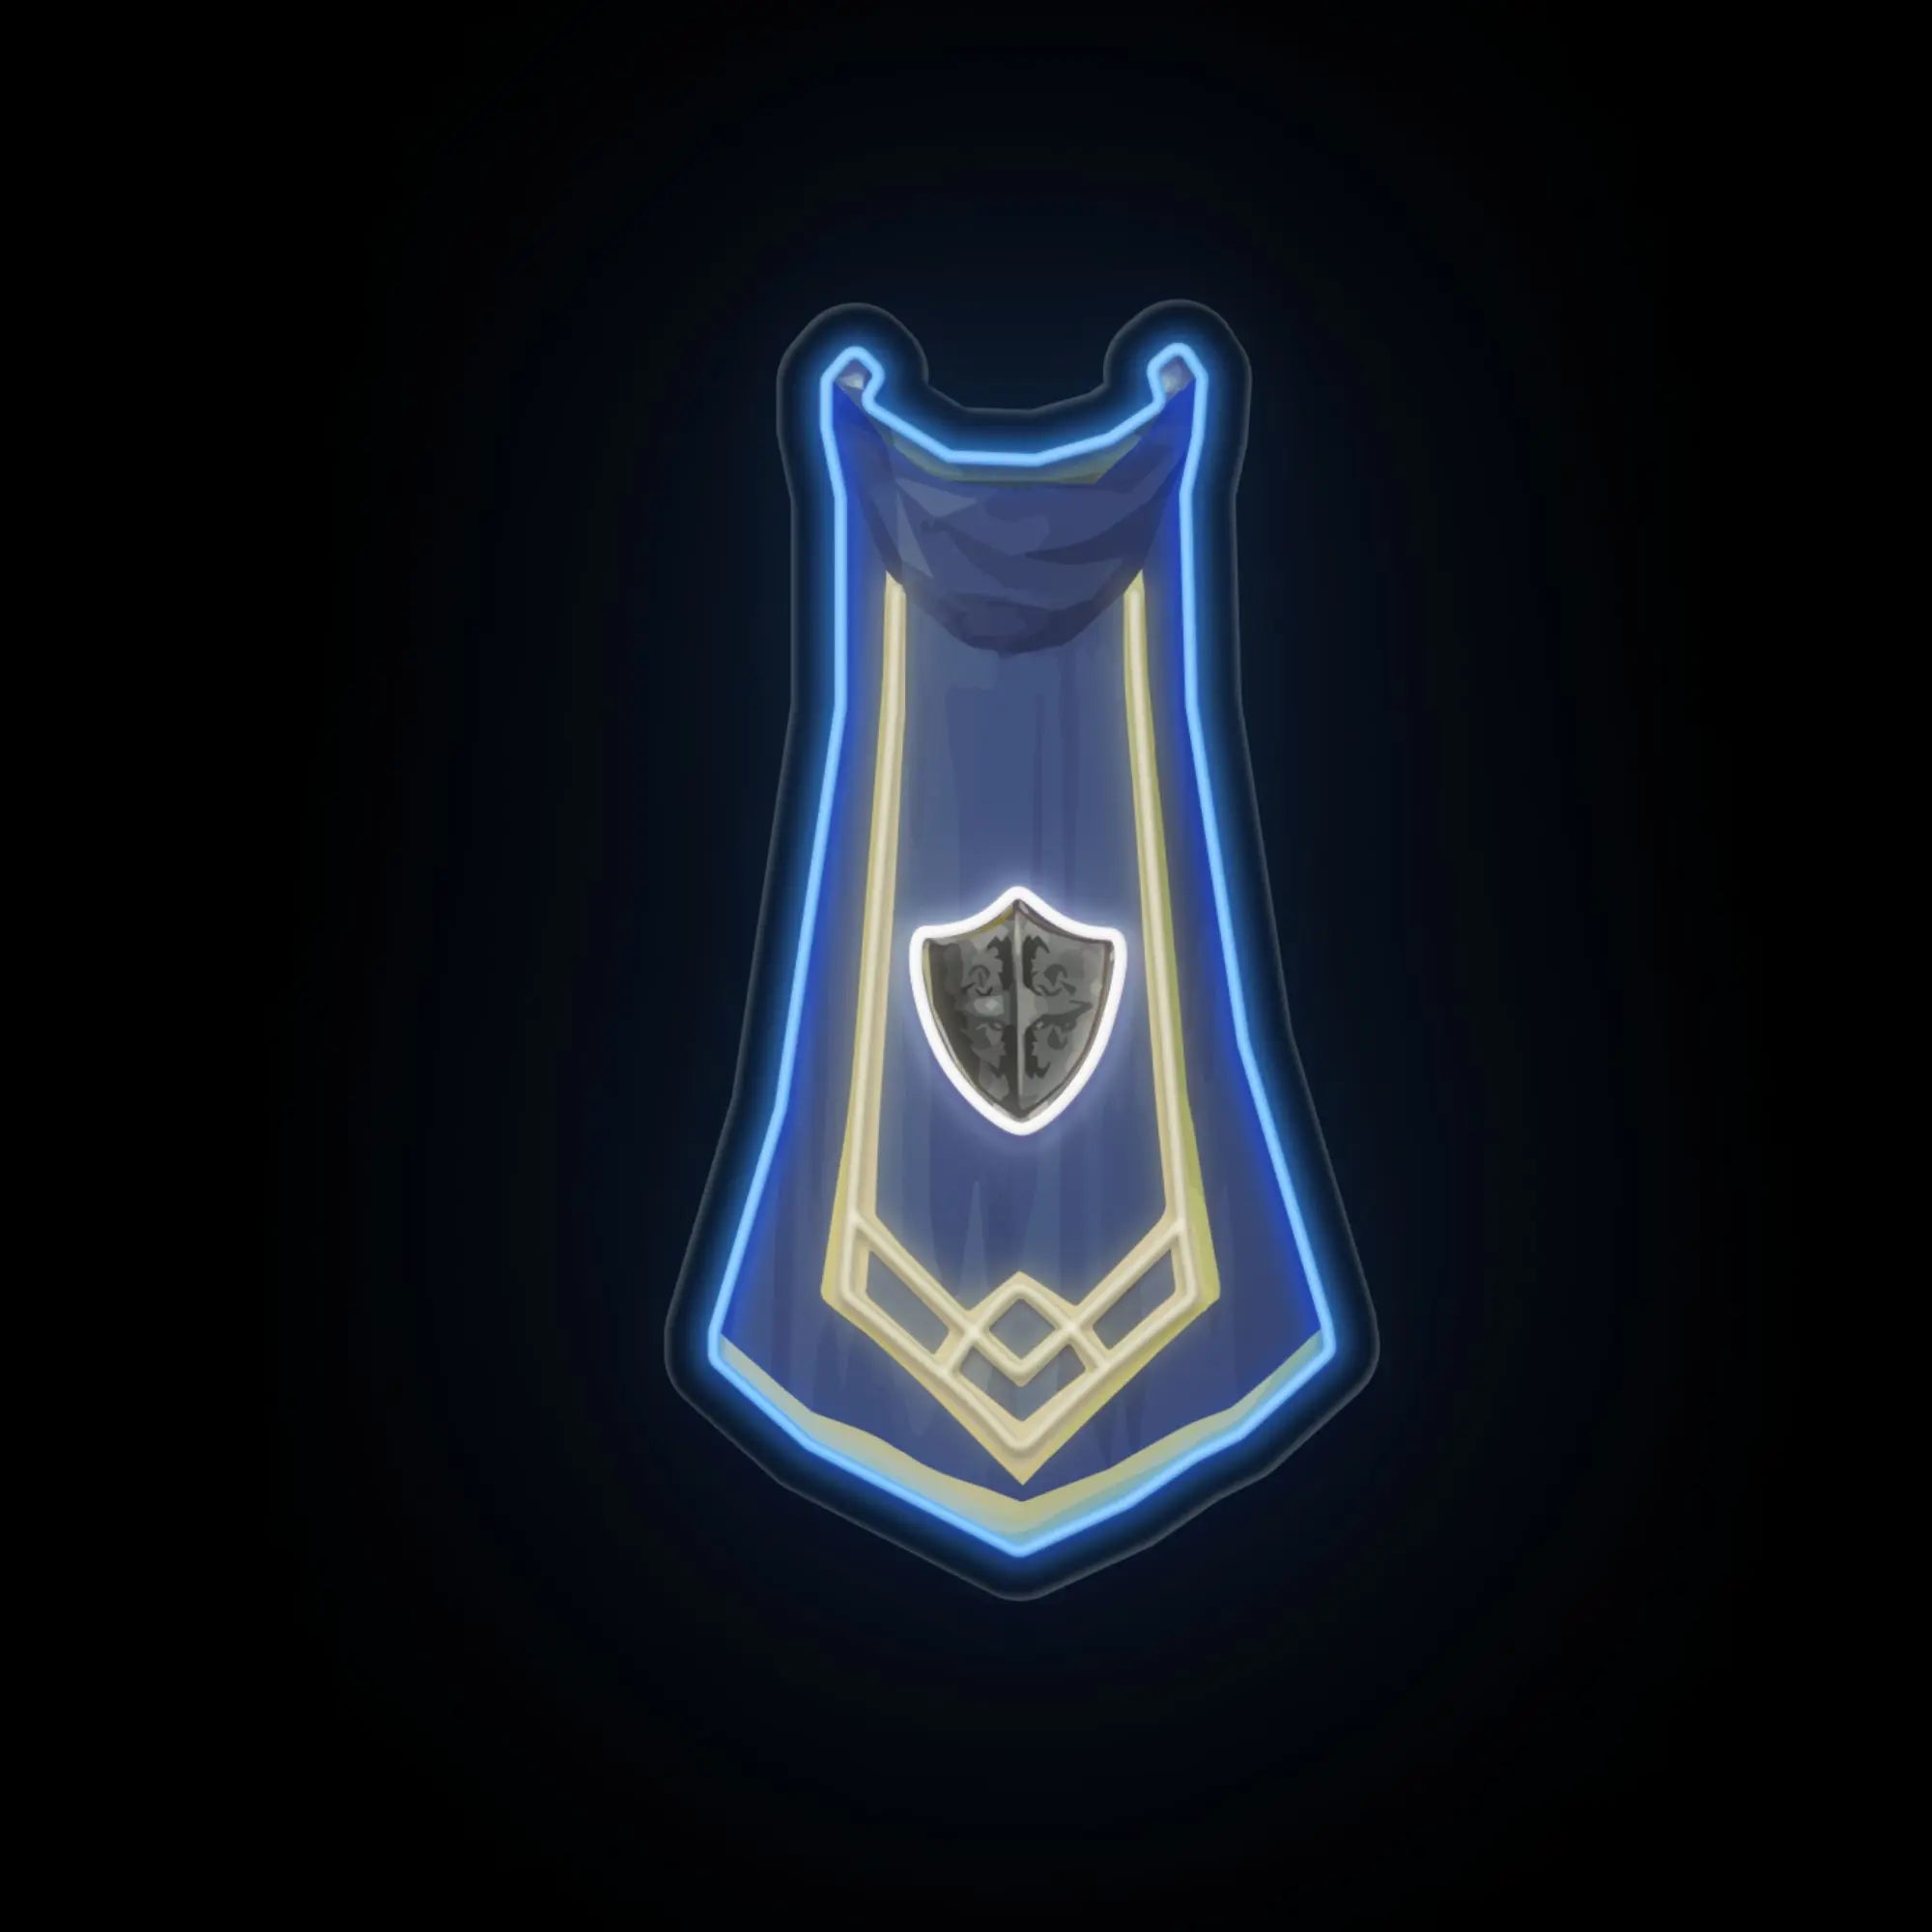 The RS3 Defence Cape LED neon sign (master cape) displayed on its own. Illuminate your gaming space with this LED neon sign, featuring the Defence cape from RS3, perfect for RuneScape fans seeking unique decor pieces that reflect their passion for the game.